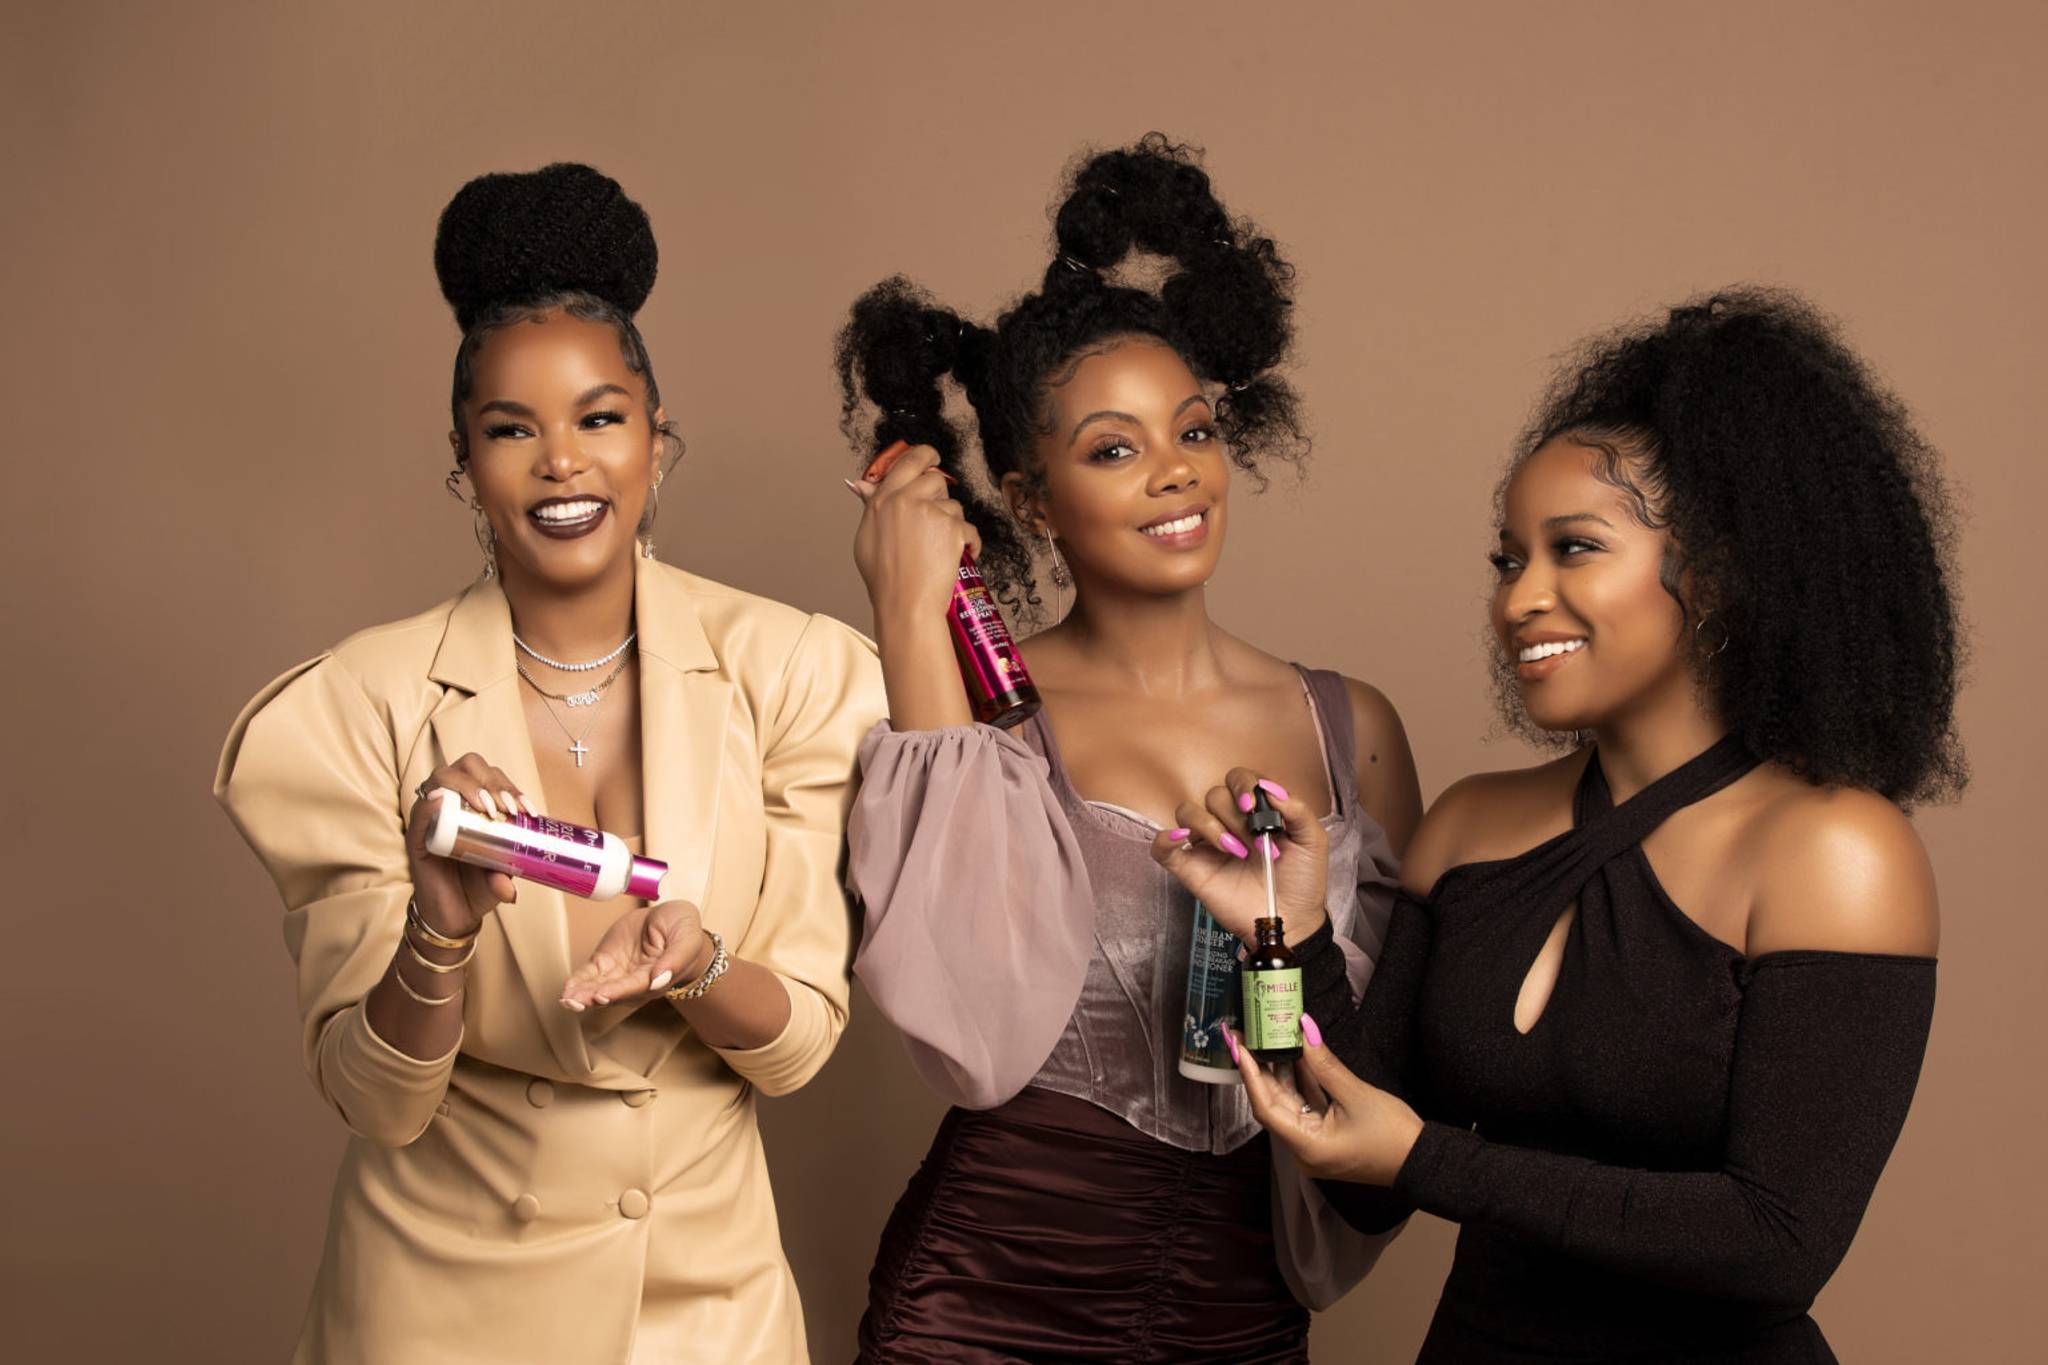 Mielle aims to expand natural hair product choices